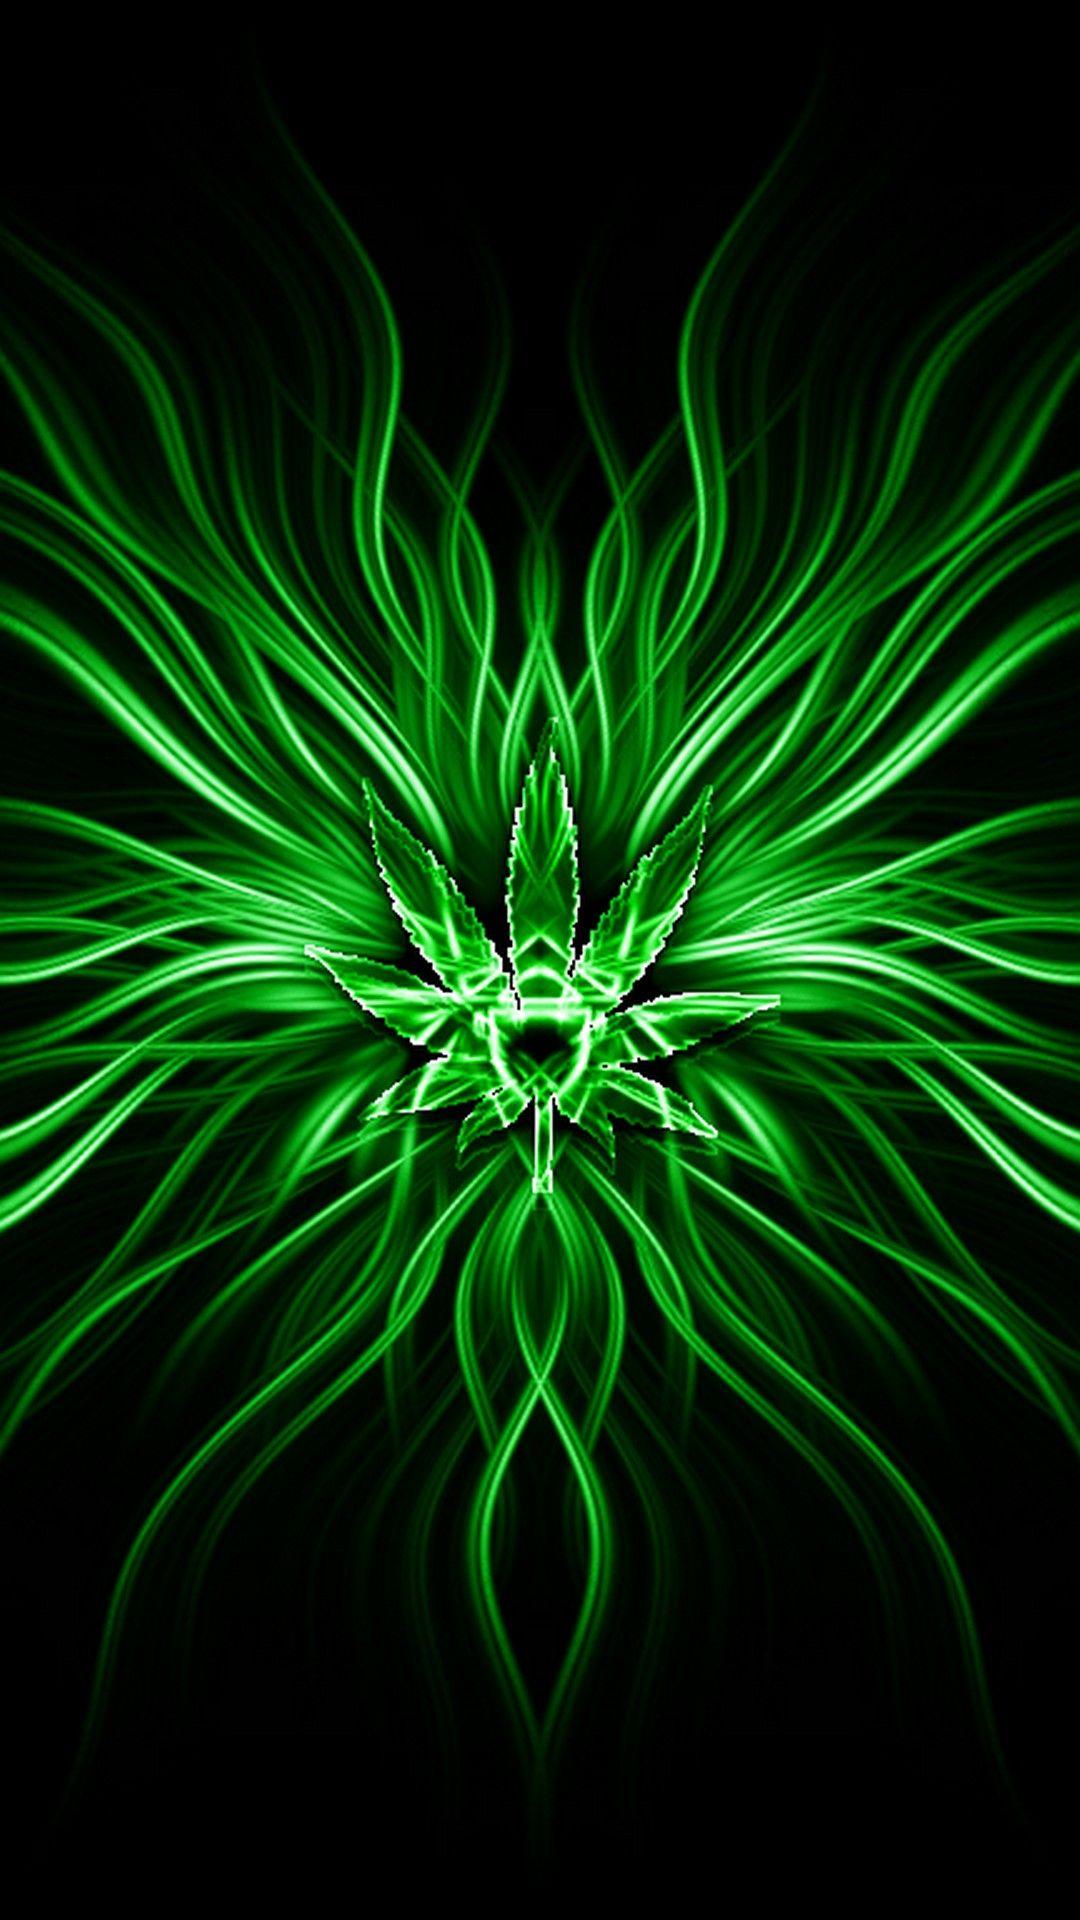 Mobile Wallpaper Wallippo And Awesome Neon Green Desktop Neon Green Desktop  Wallpaper For Android Wallpapers Iphone Creator Rooms Maker Walls Mobile  Free  Imágenes españoles